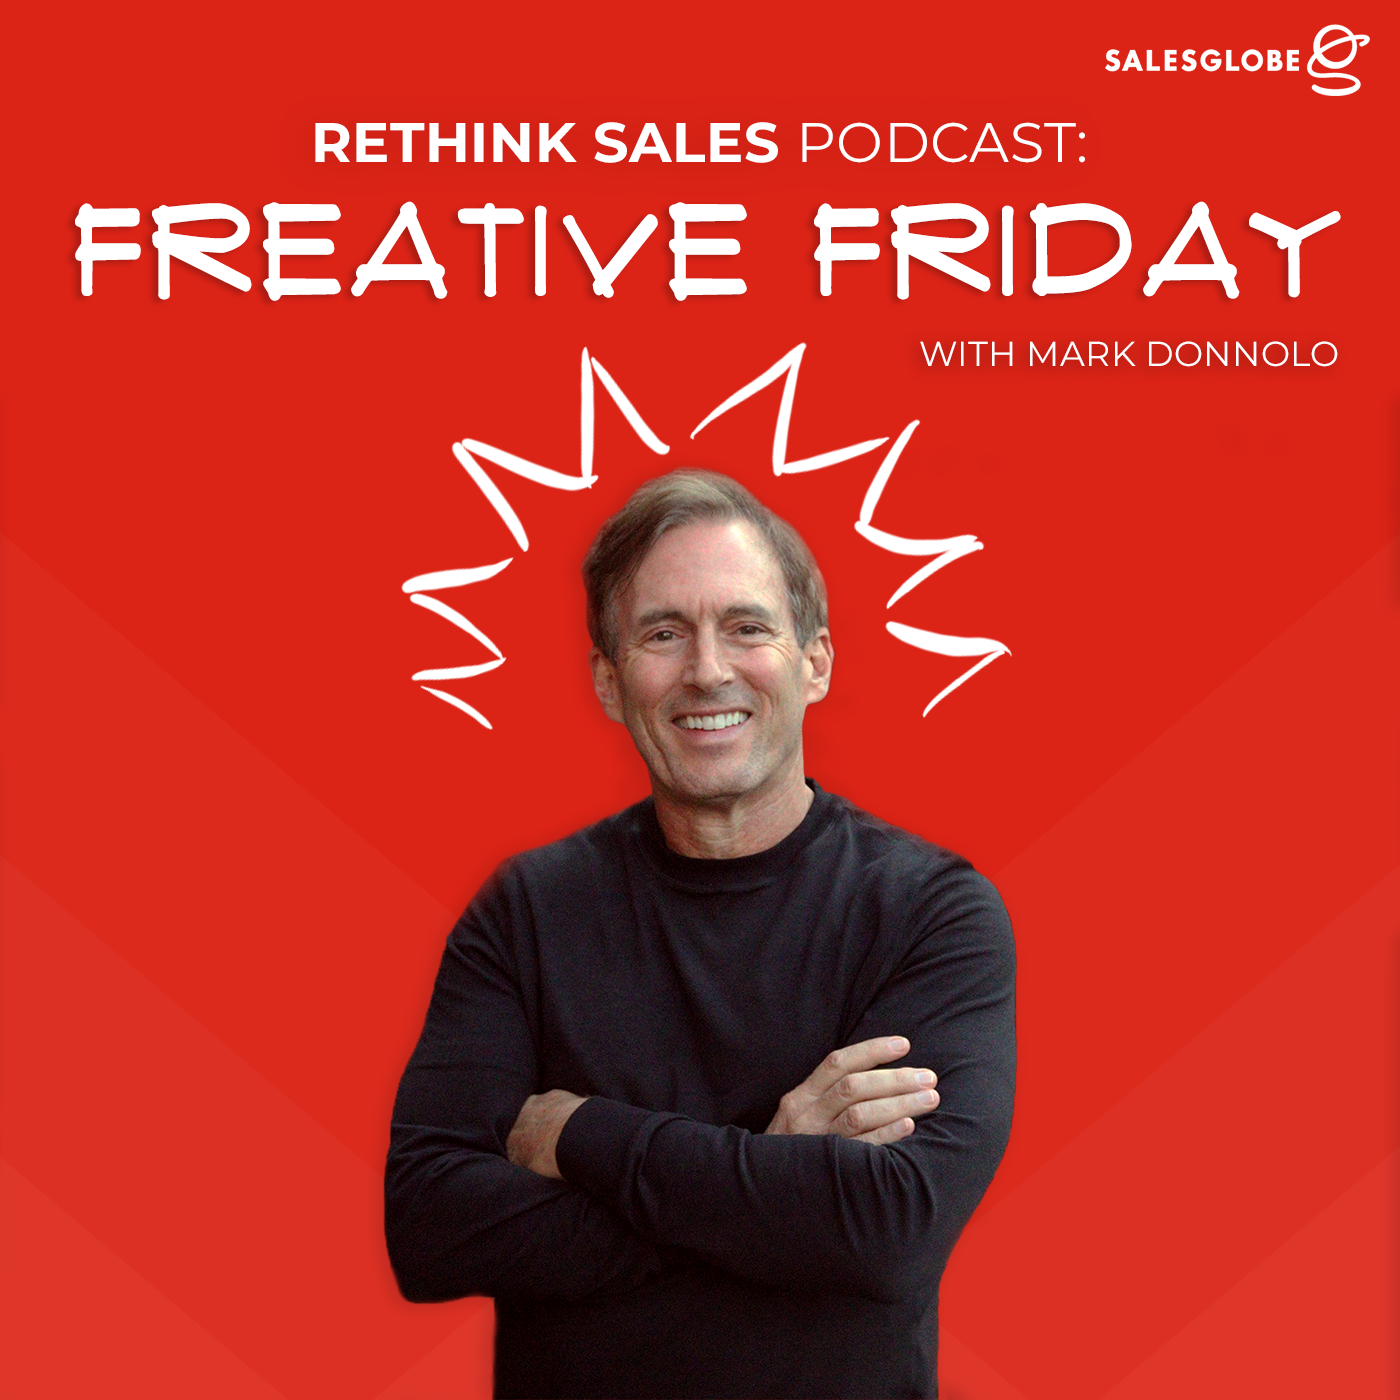 92: Freative Friday - The Art of Change Part 2